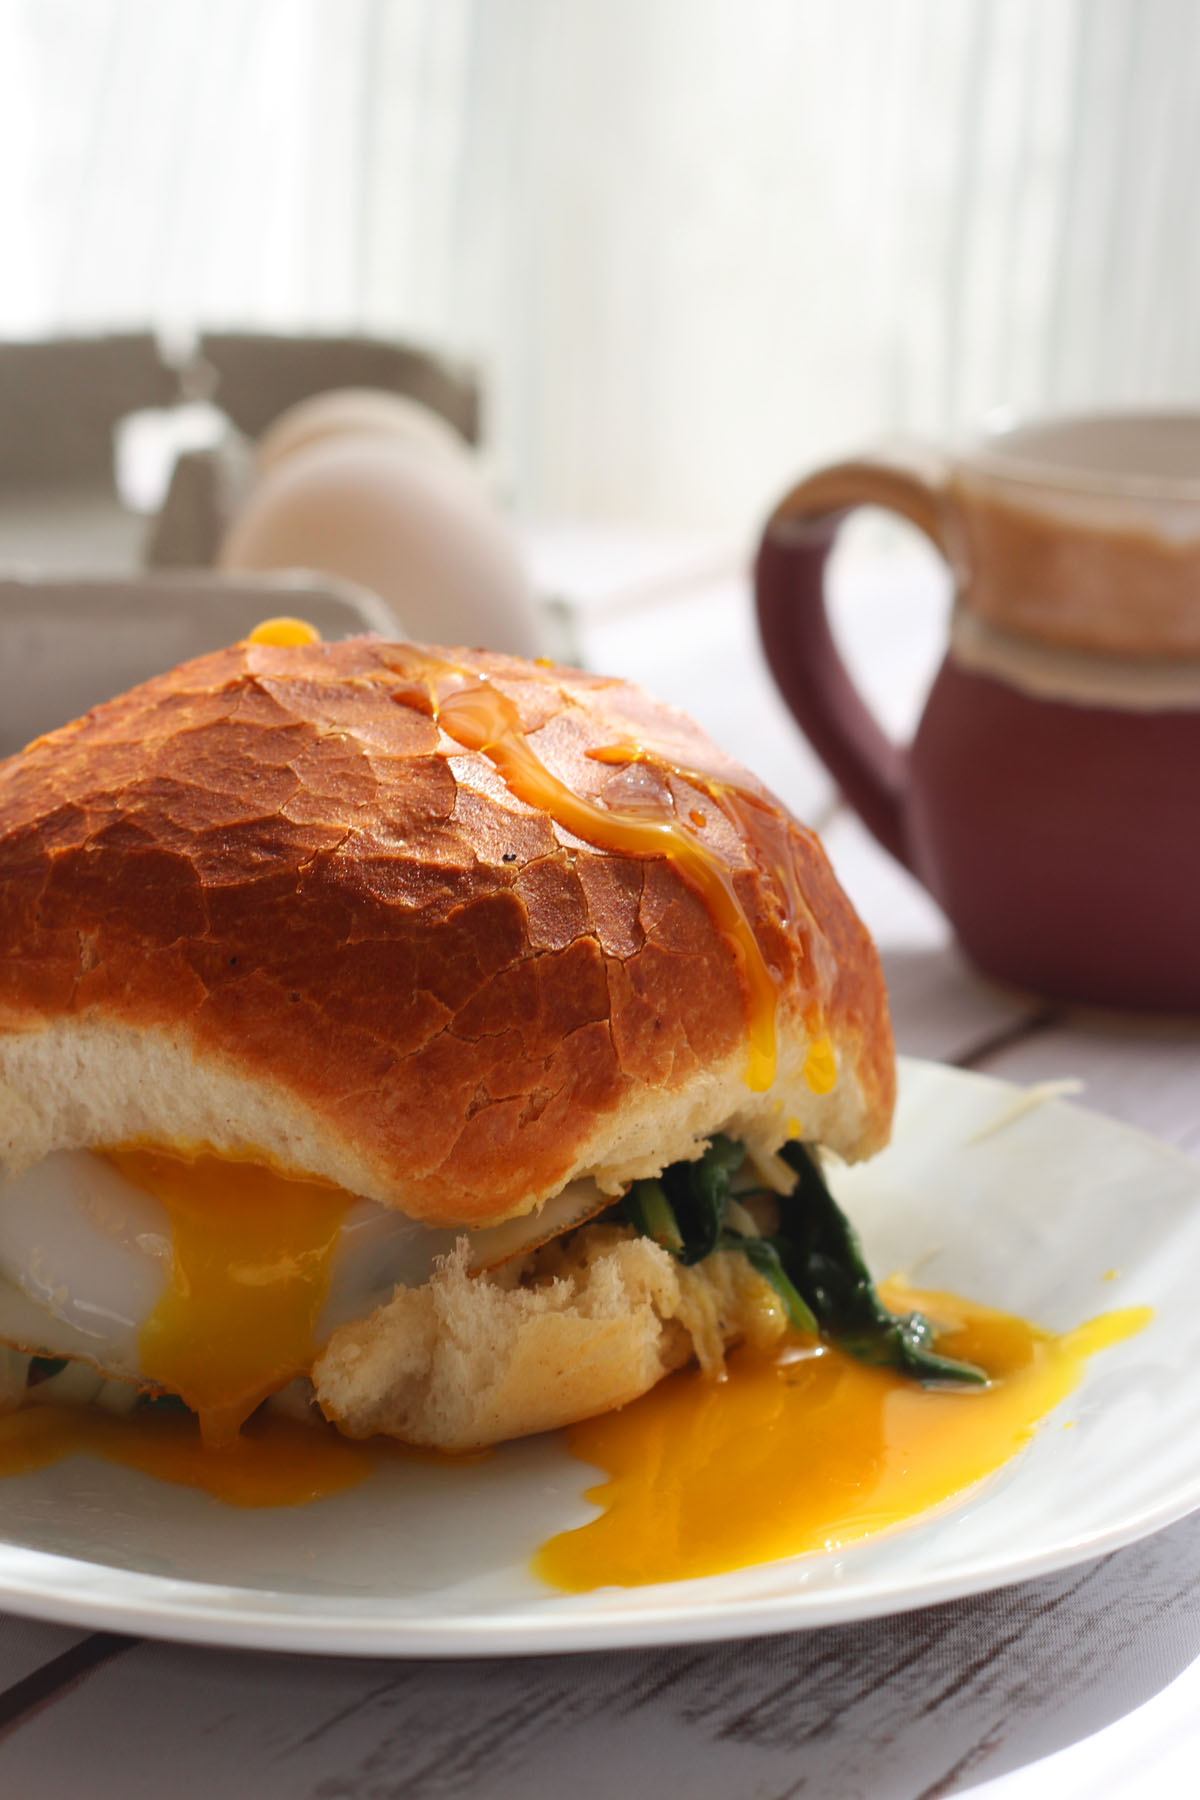 Duck Egg Sandwich with Gruyère and Wilted Spinach